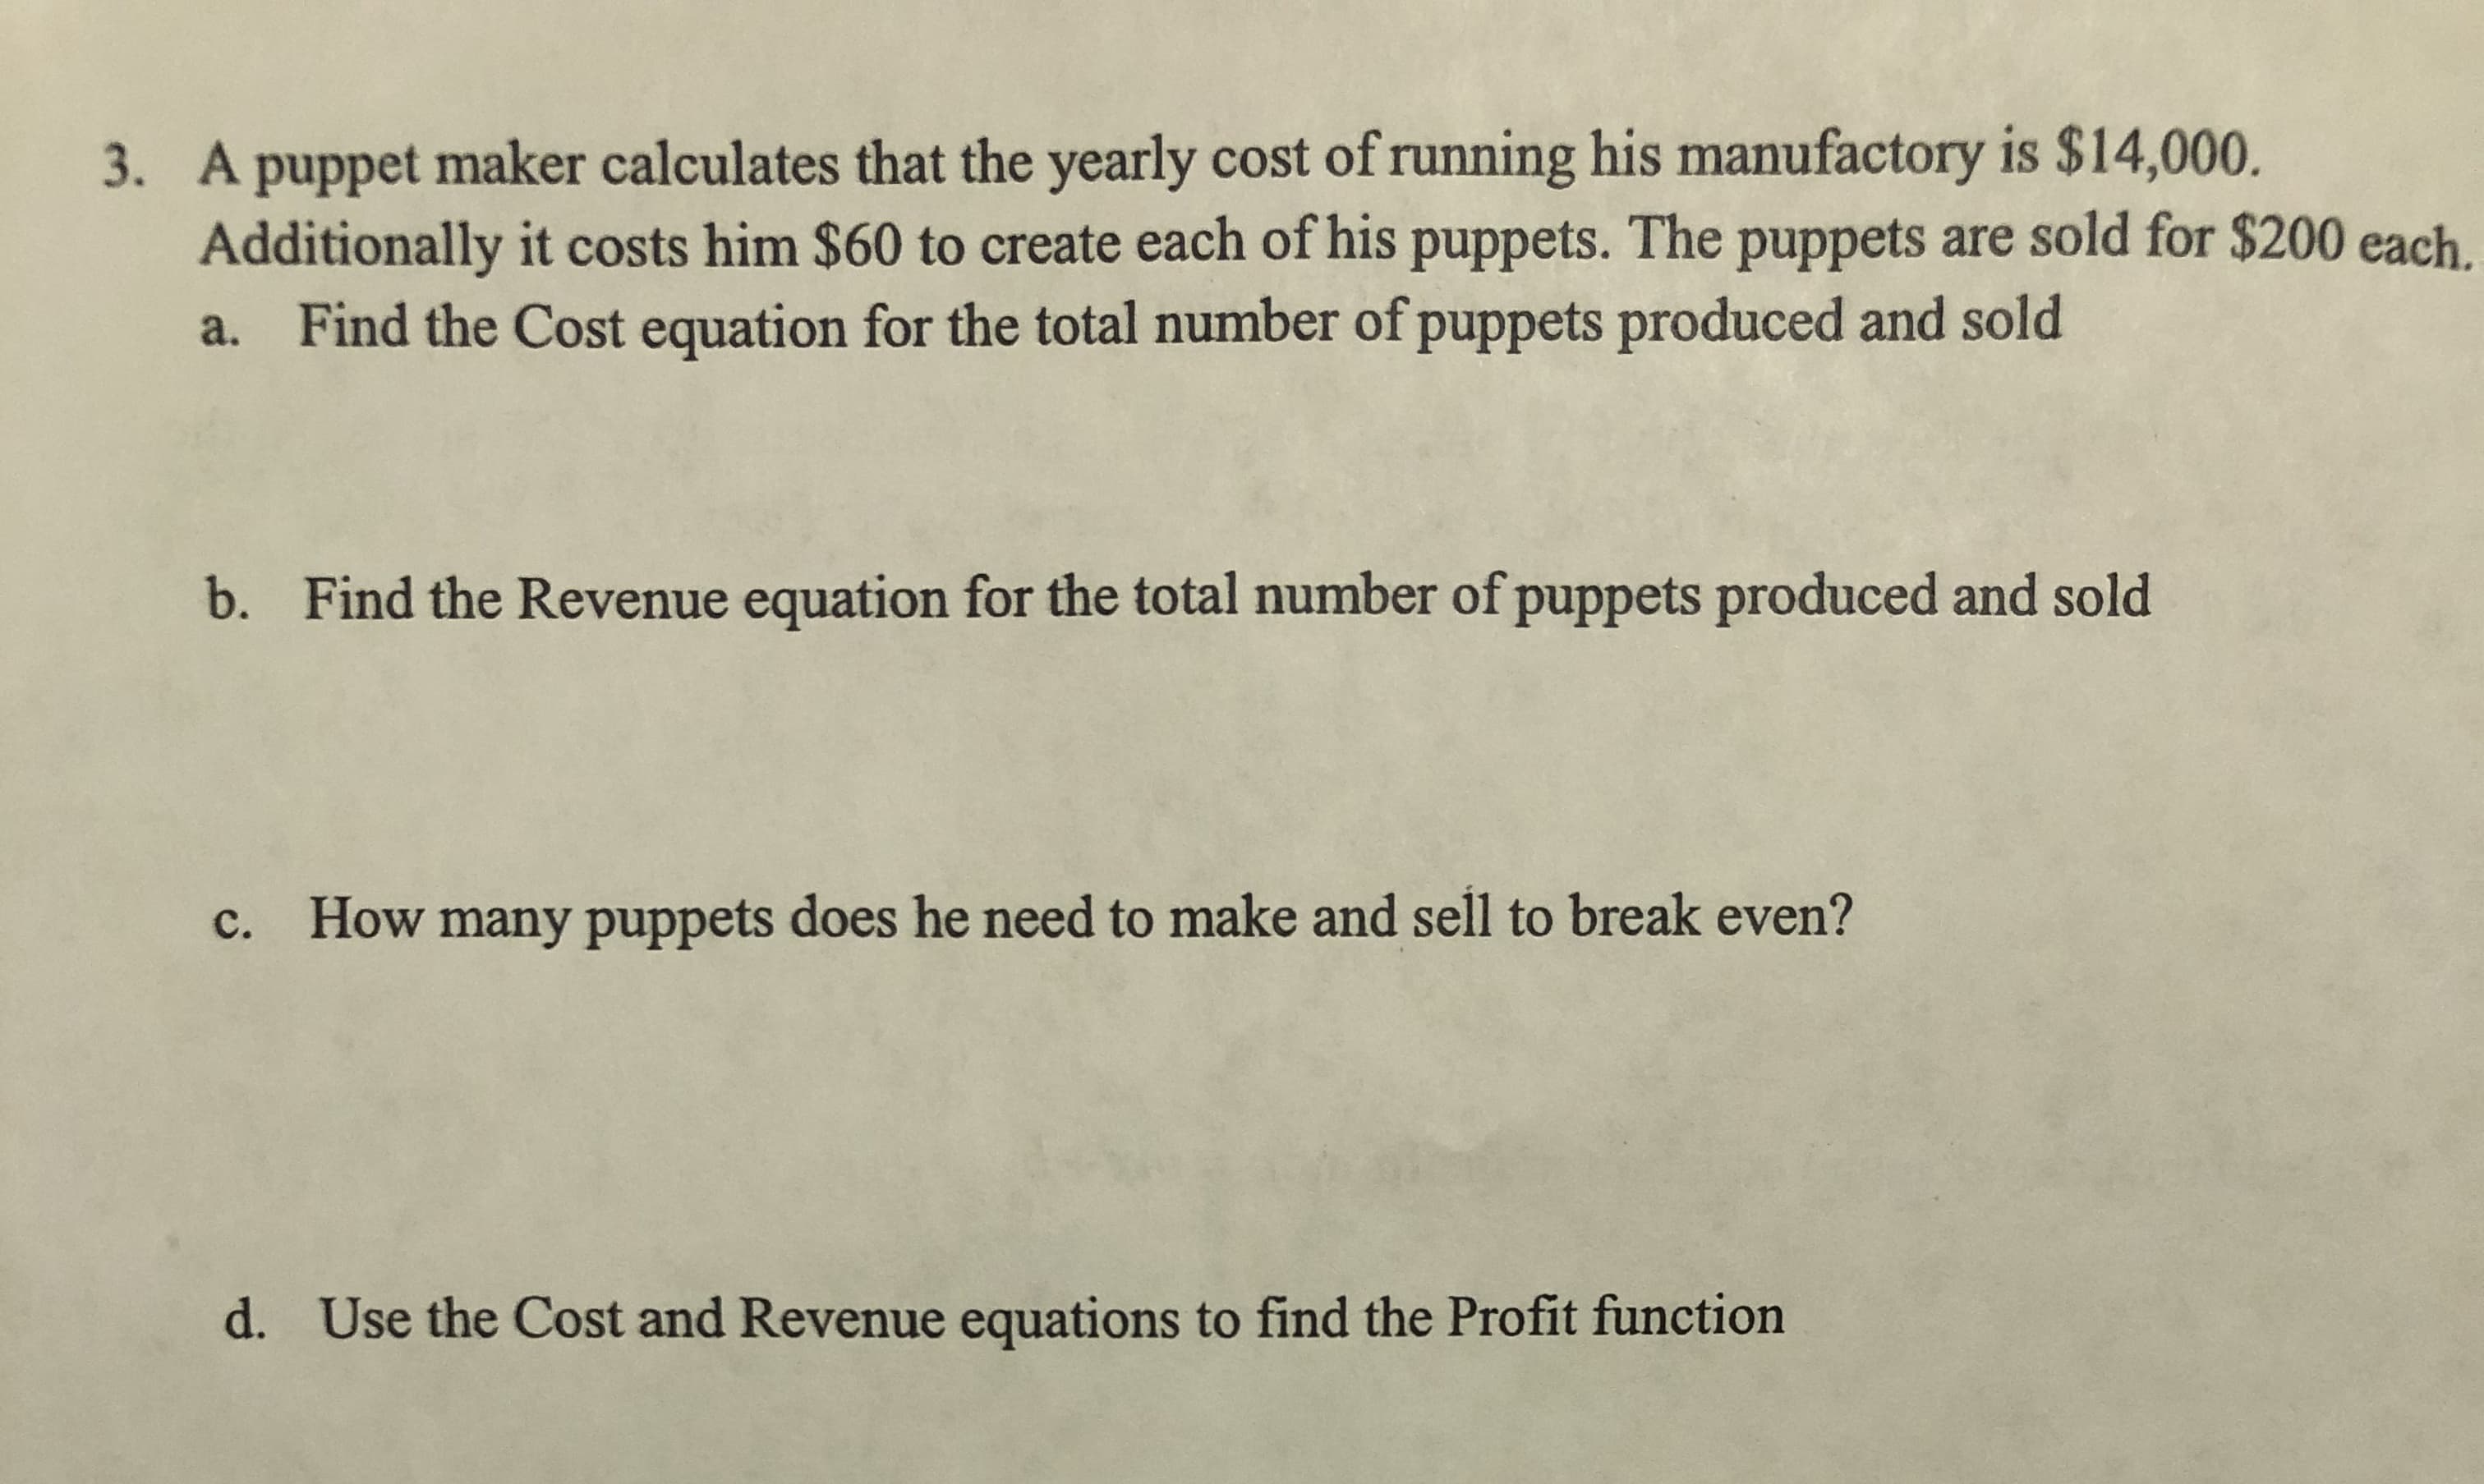 3. A puppet maker calculates that the yearly cost of running his manufactory is $14,000.
Additionally it costs him $60 to create each of his puppets. The puppets are sold for $200 each.
a. Find the Cost equation for the total number of puppets produced and sold
Find the Revenue equation for the total number of puppets produced and sold
b.
c. How many puppets does he need to make and sell to break even?
Use the Cost and Revenue equations to find the Profit function
d.
